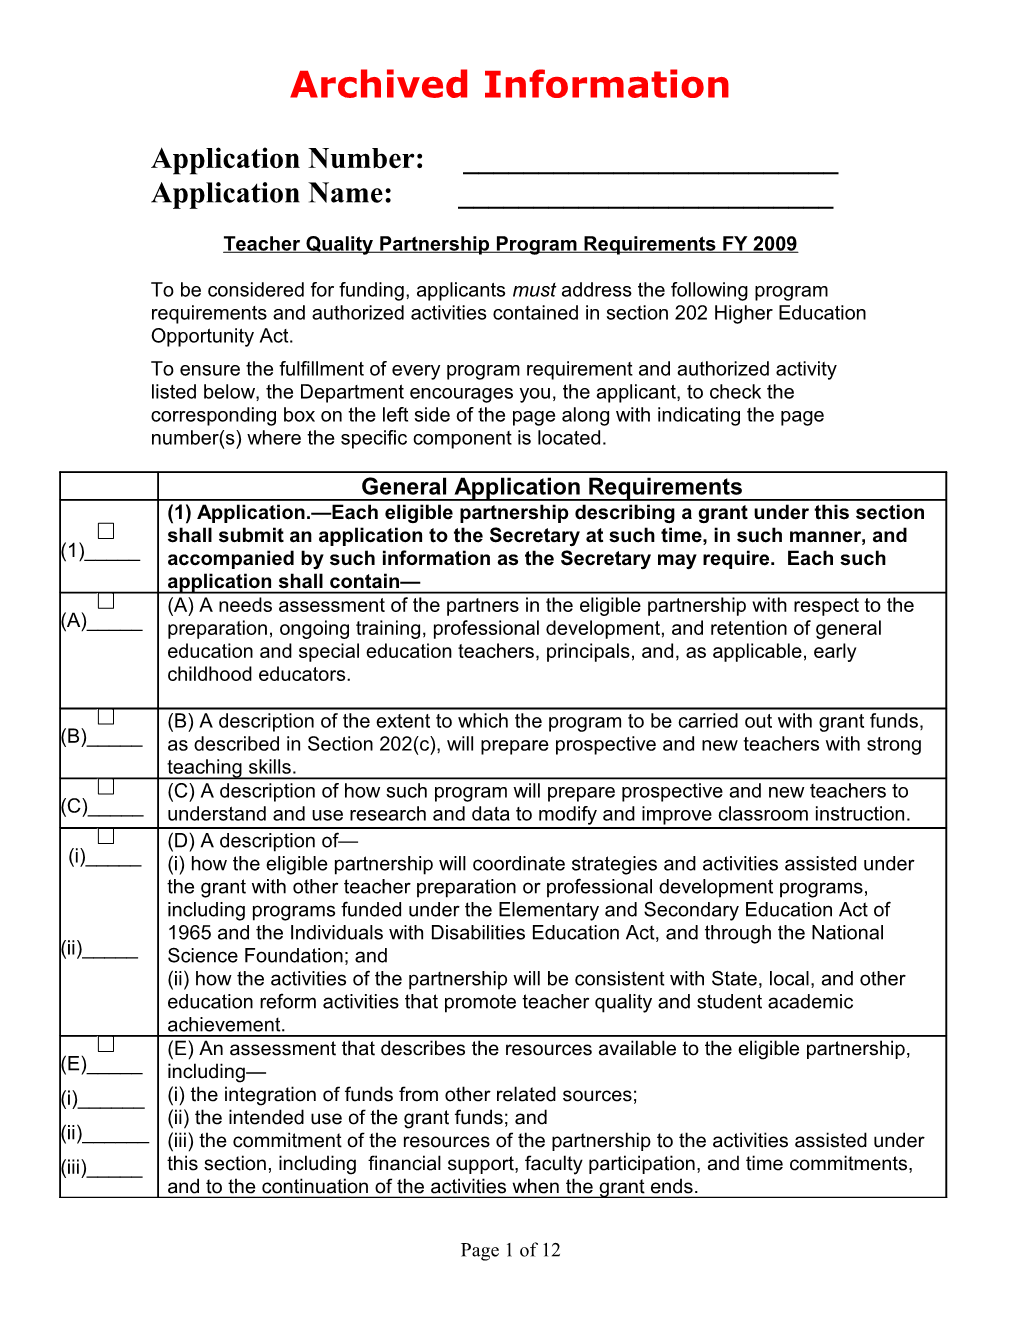 Archived: TQP Program Requirements and Authorized Activities Checklist (MS Word)